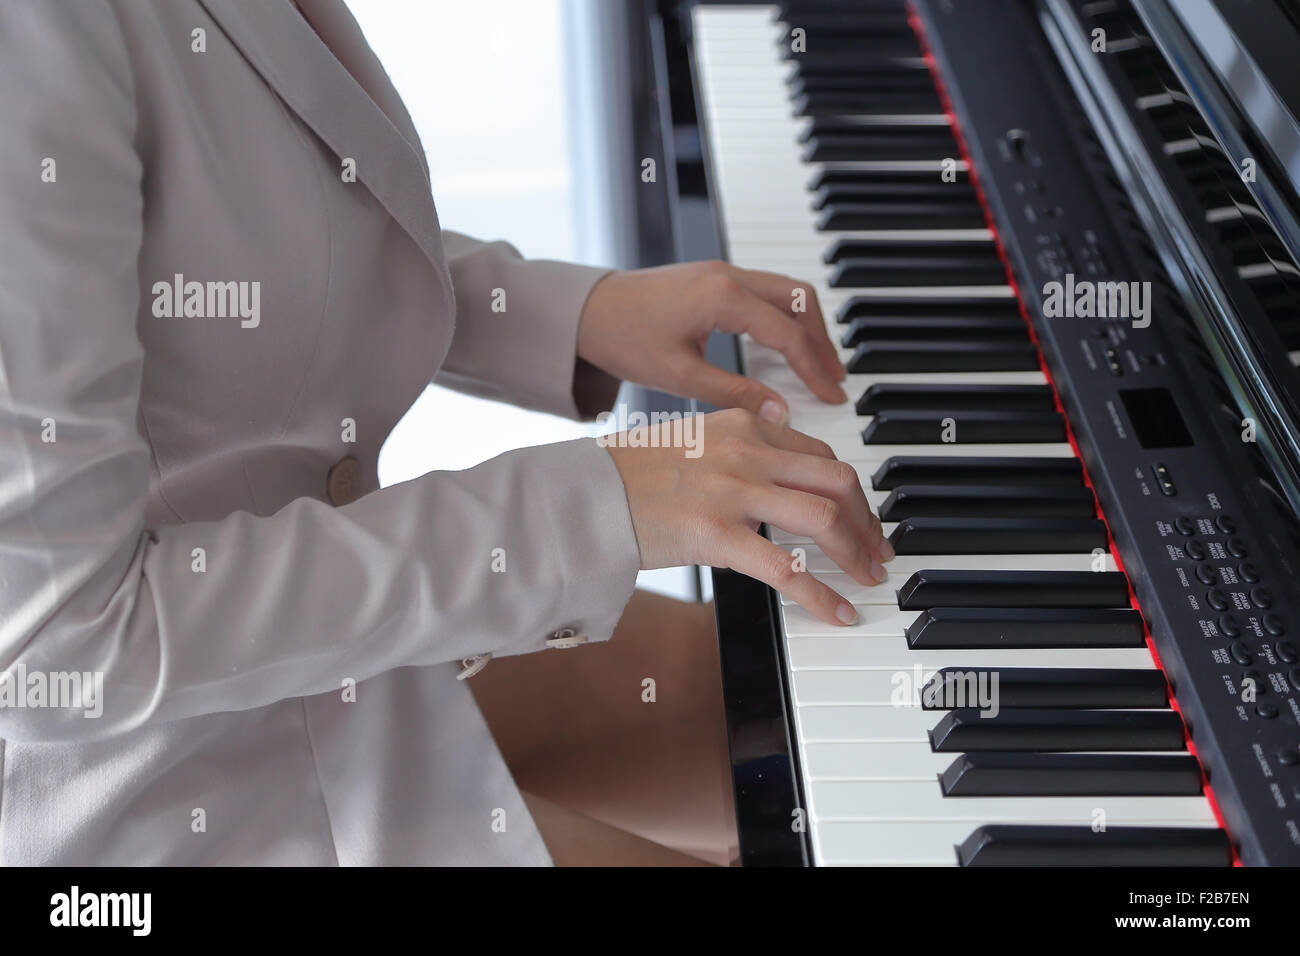 hands of a young woman playing piano Stock Photo